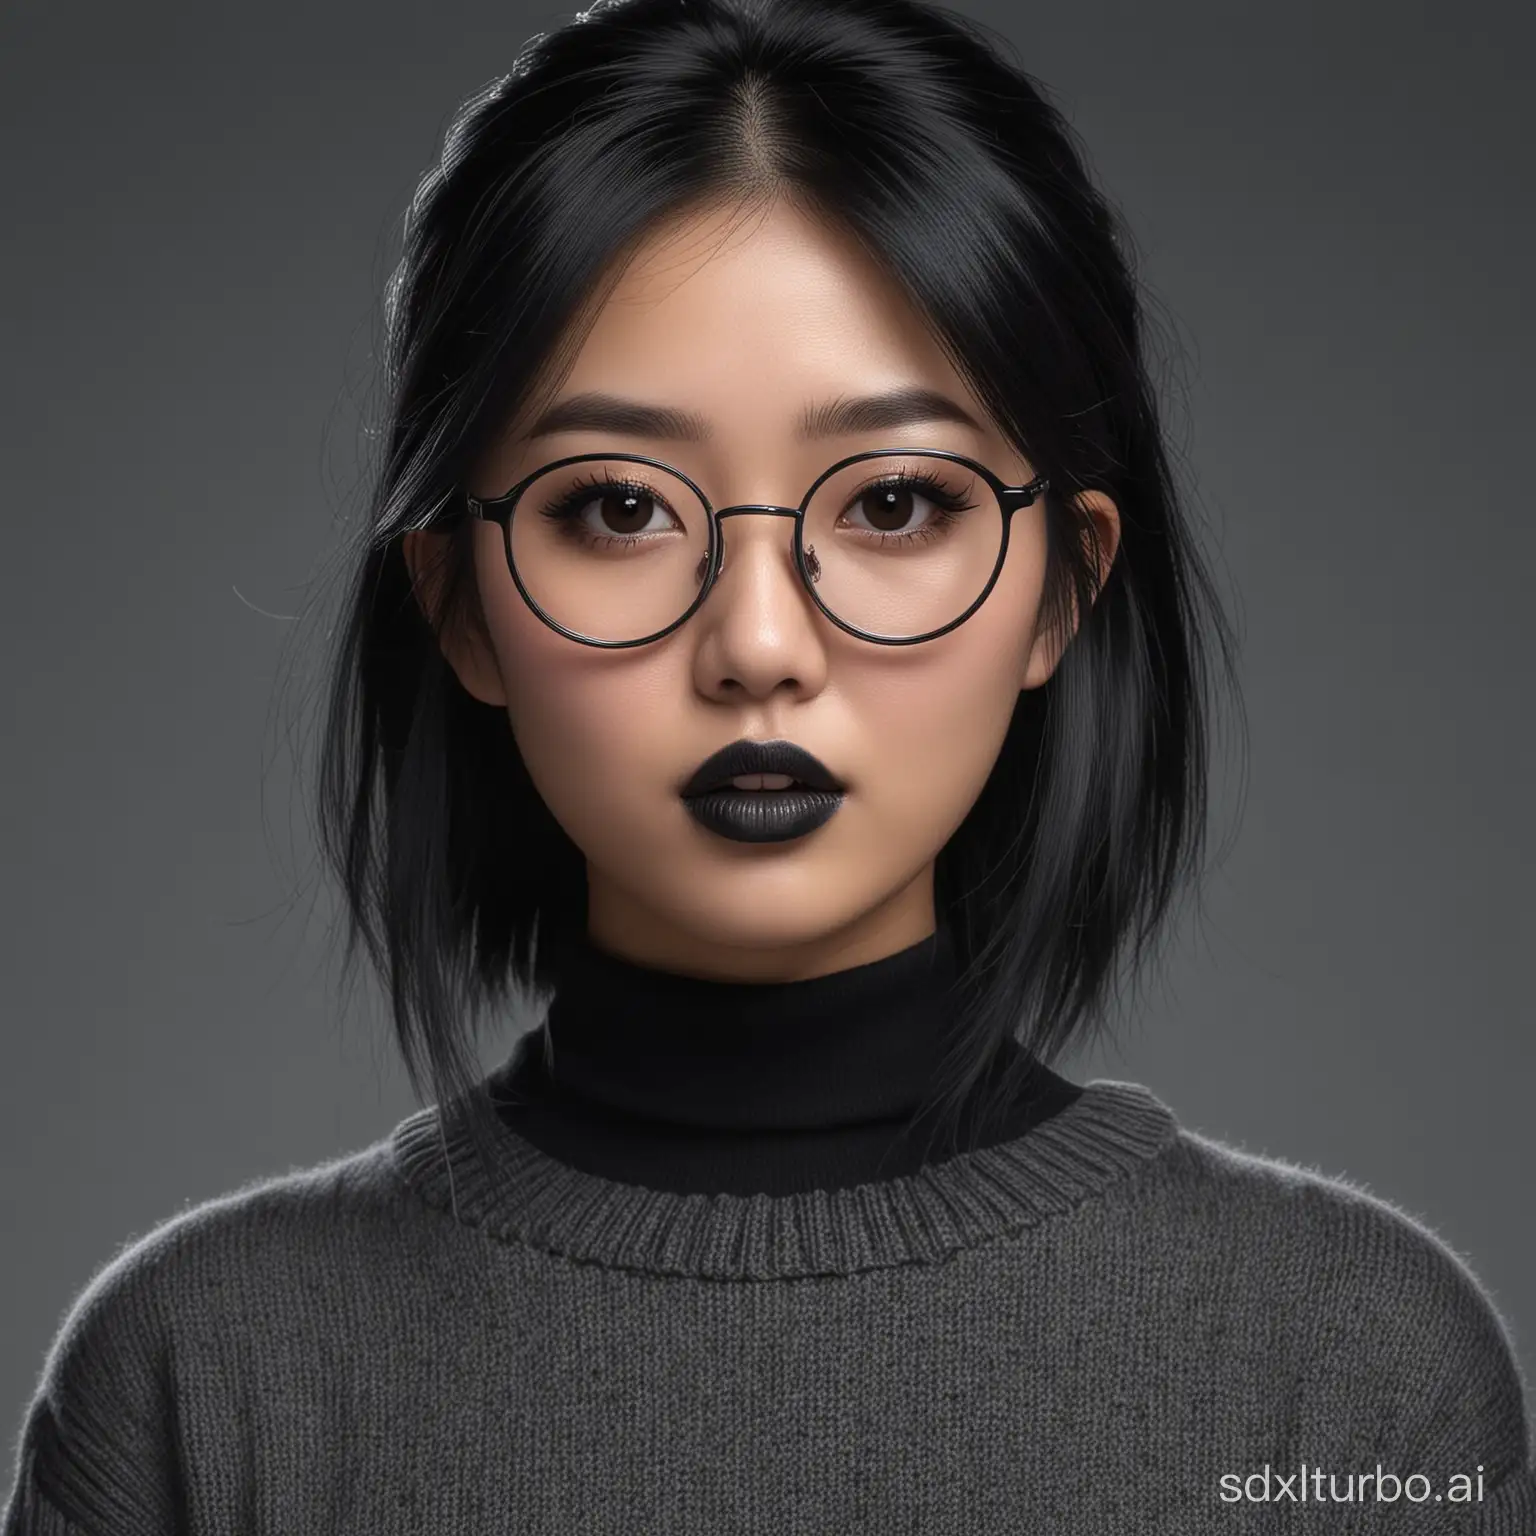 Portrait-of-a-Photorealistic-Asian-Woman-with-Black-Hair-and-Stylish-Attire-in-4K-Resolution